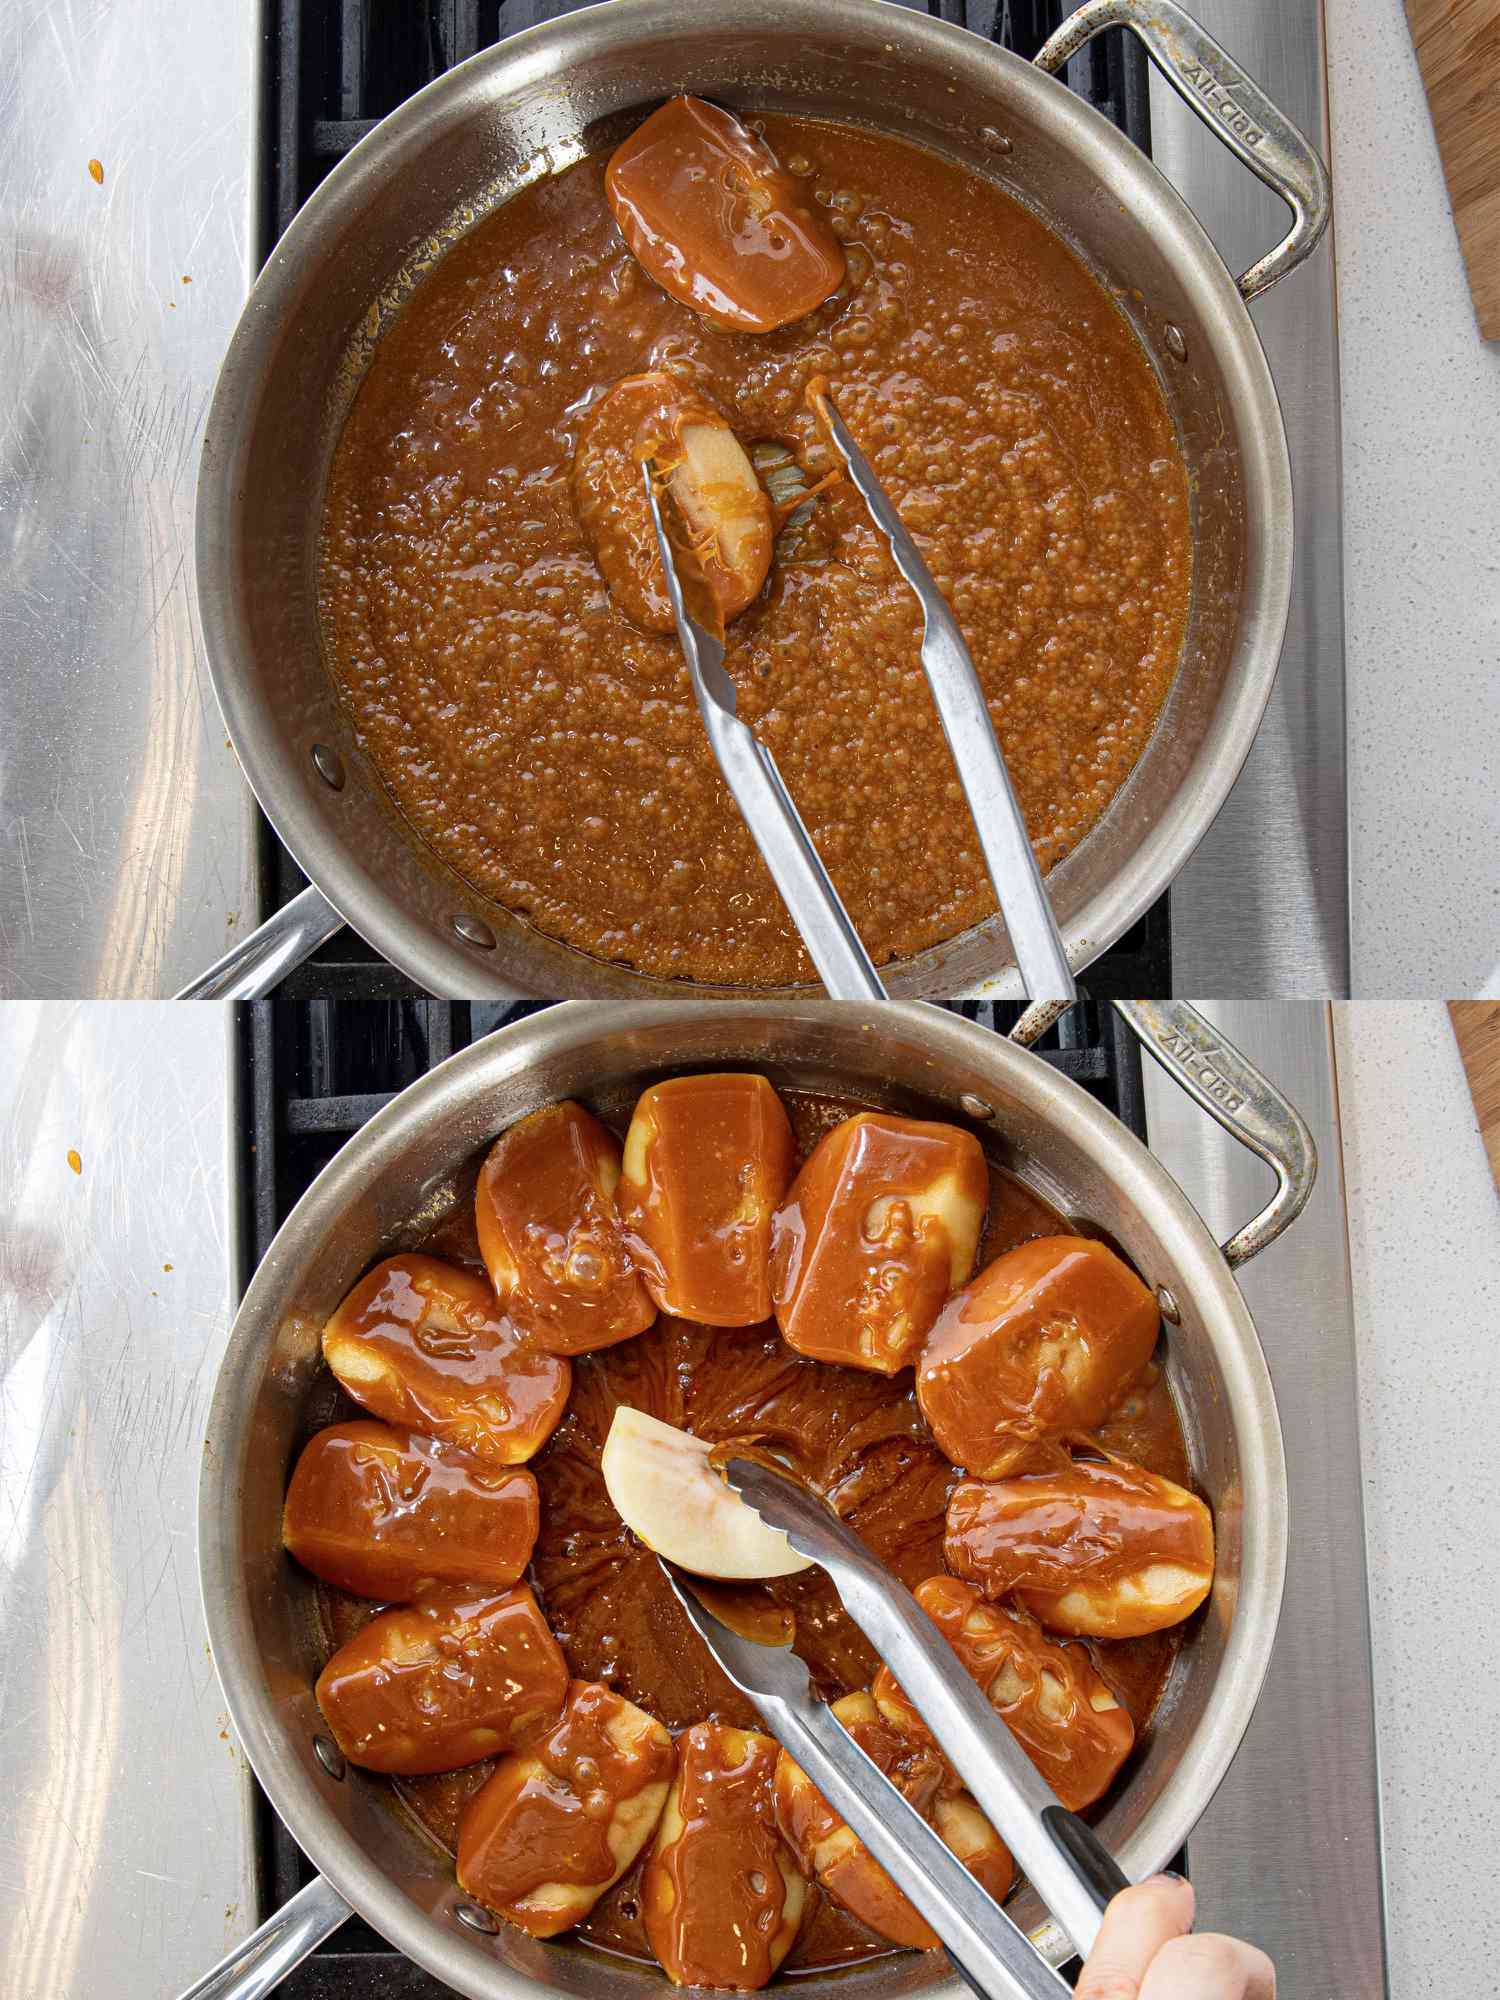 Two image collage of dipping apple in caramel in pan and creating a. ring